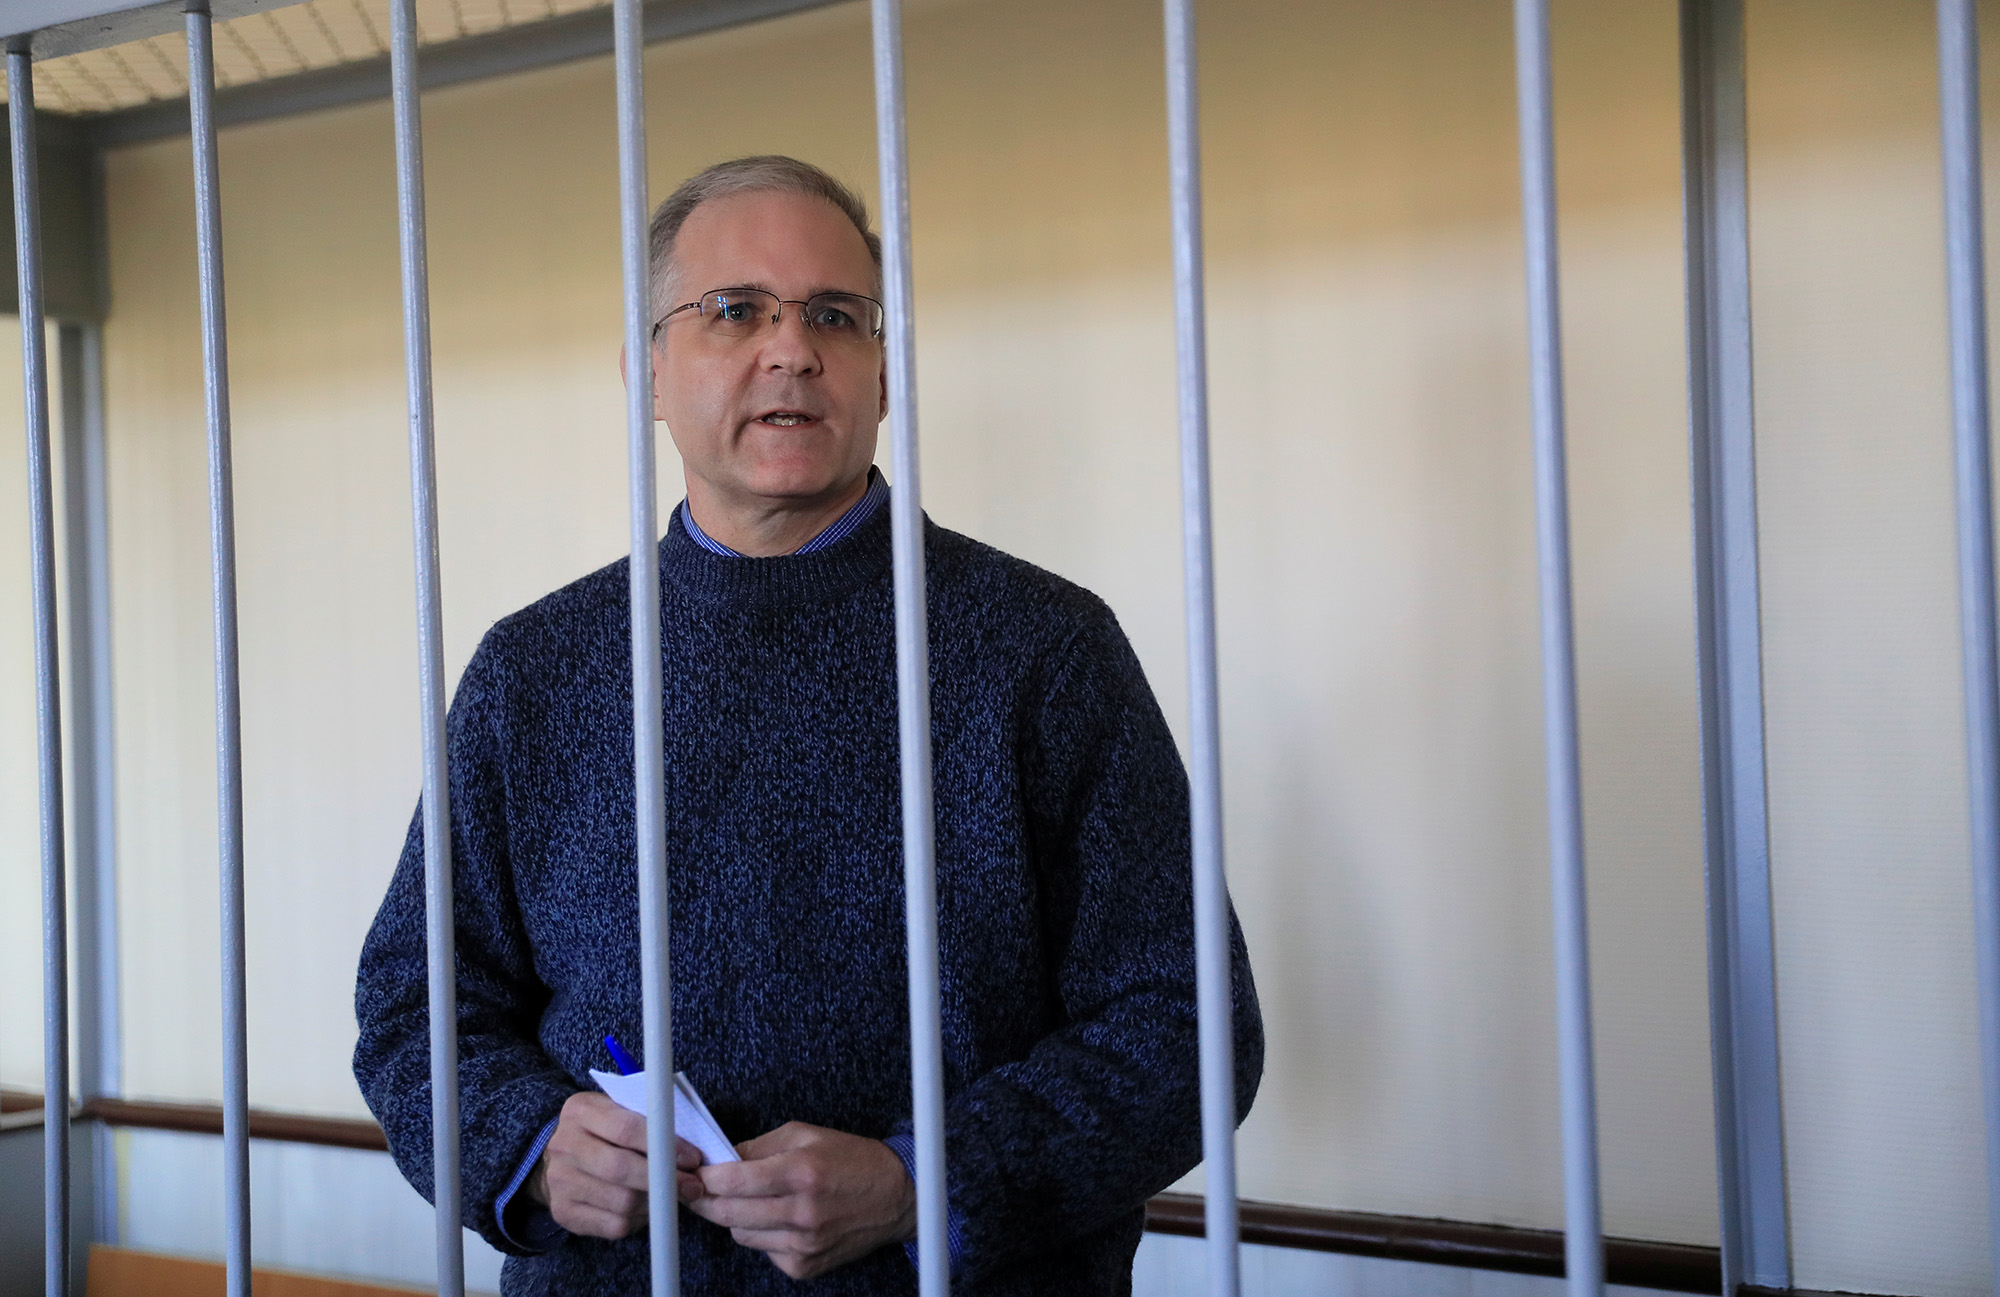 Former U.S. Marine Paul Whelan stands inside a defendants' cage before a court hearing in Moscow, Russia, on August 23, 2019